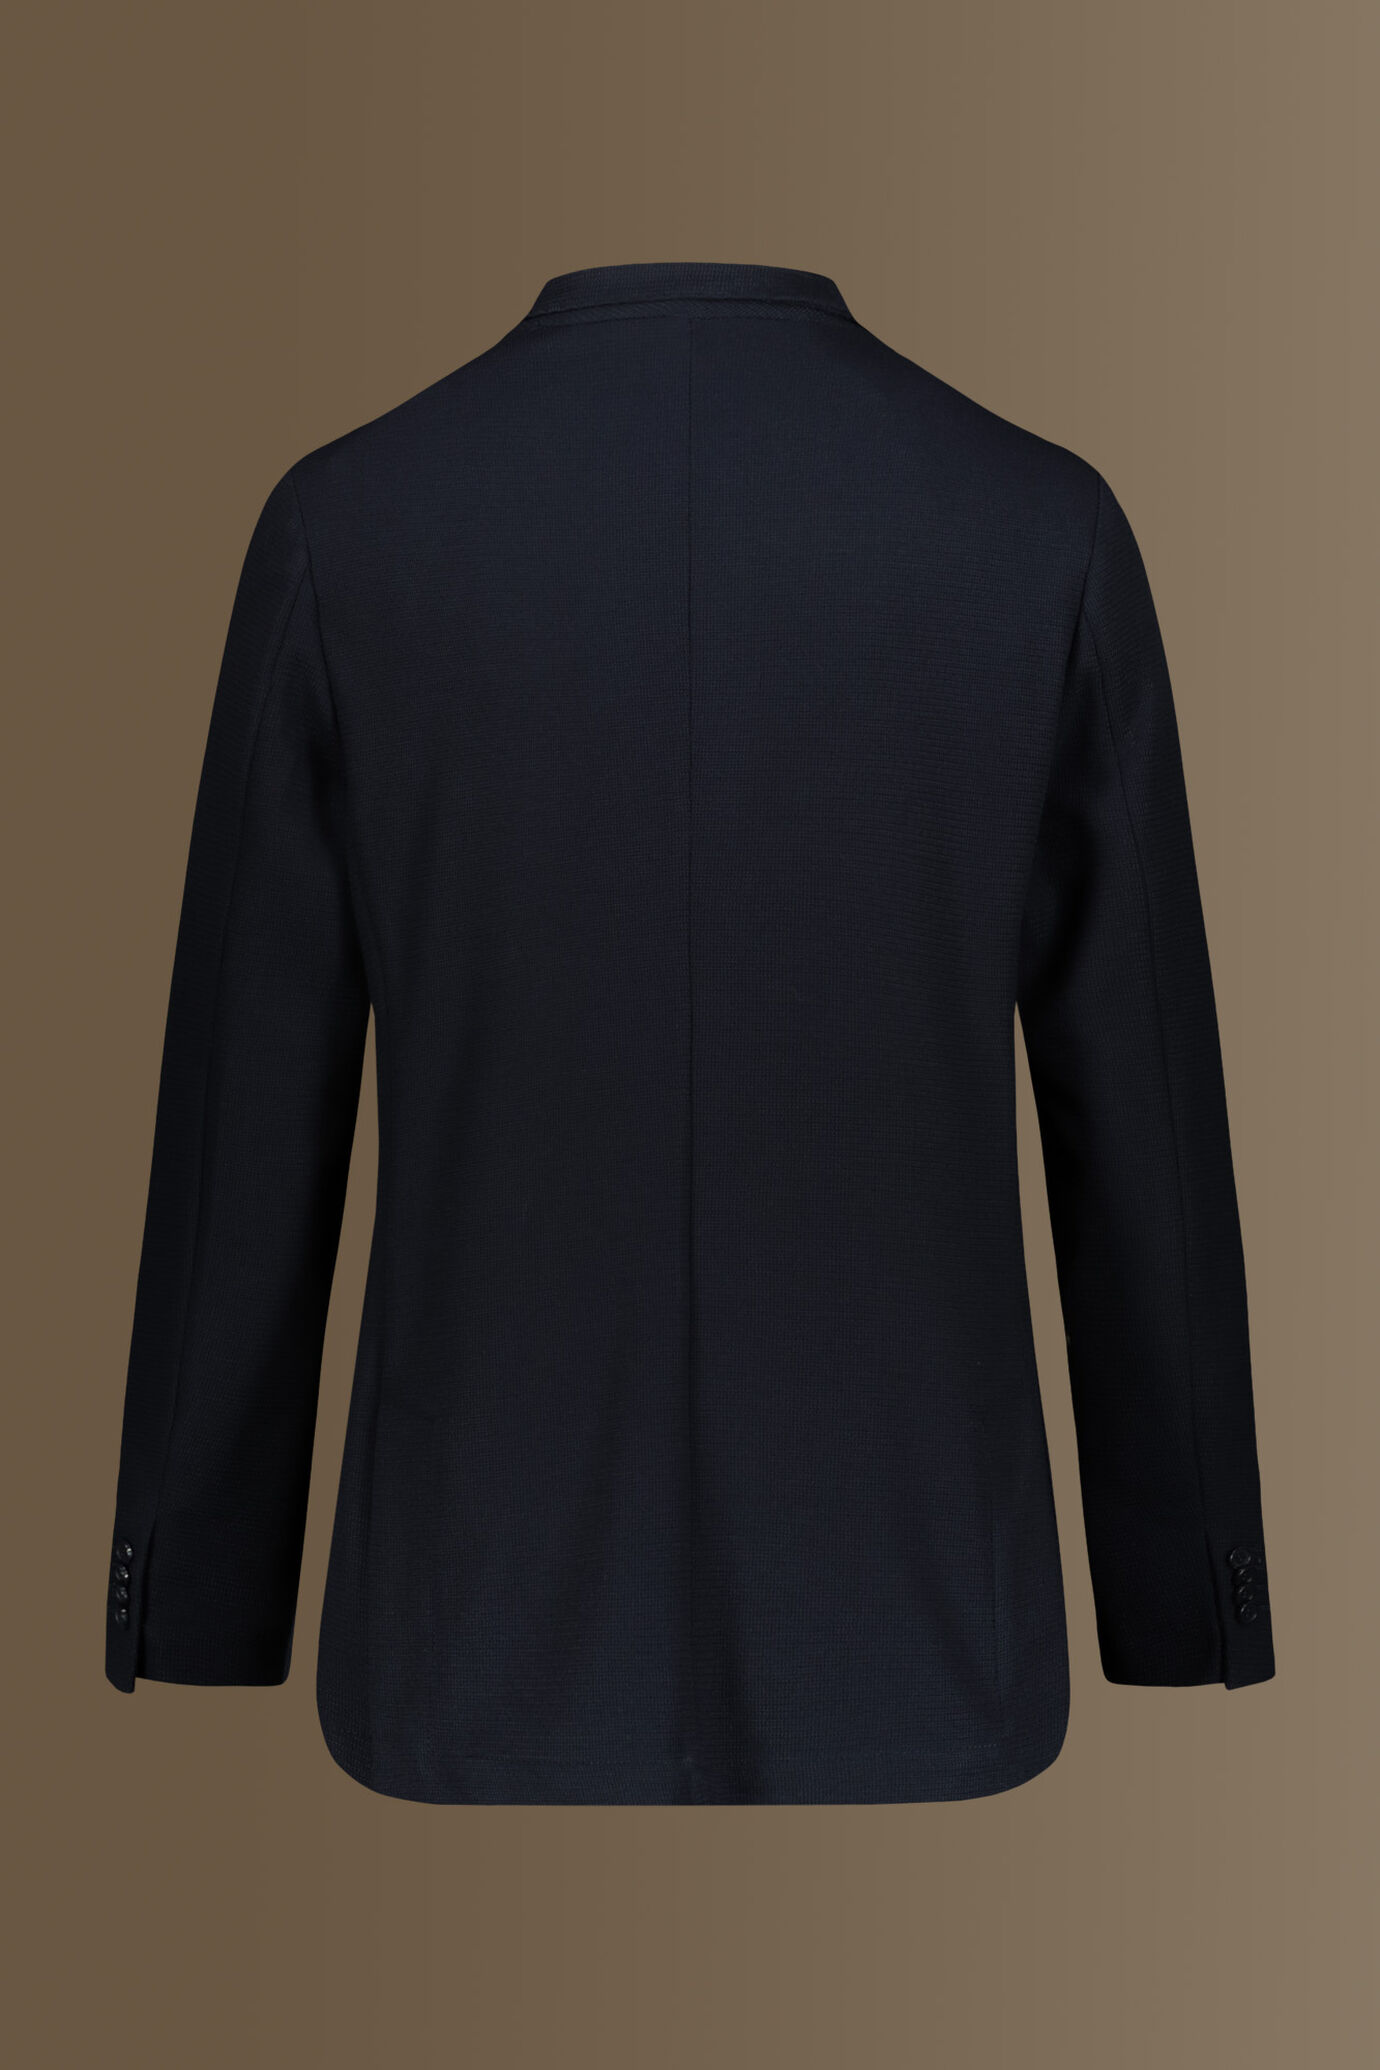 Giacca uomo monopetto in jersey piquet con tasca a toppa dark blue Made in italy image number 1